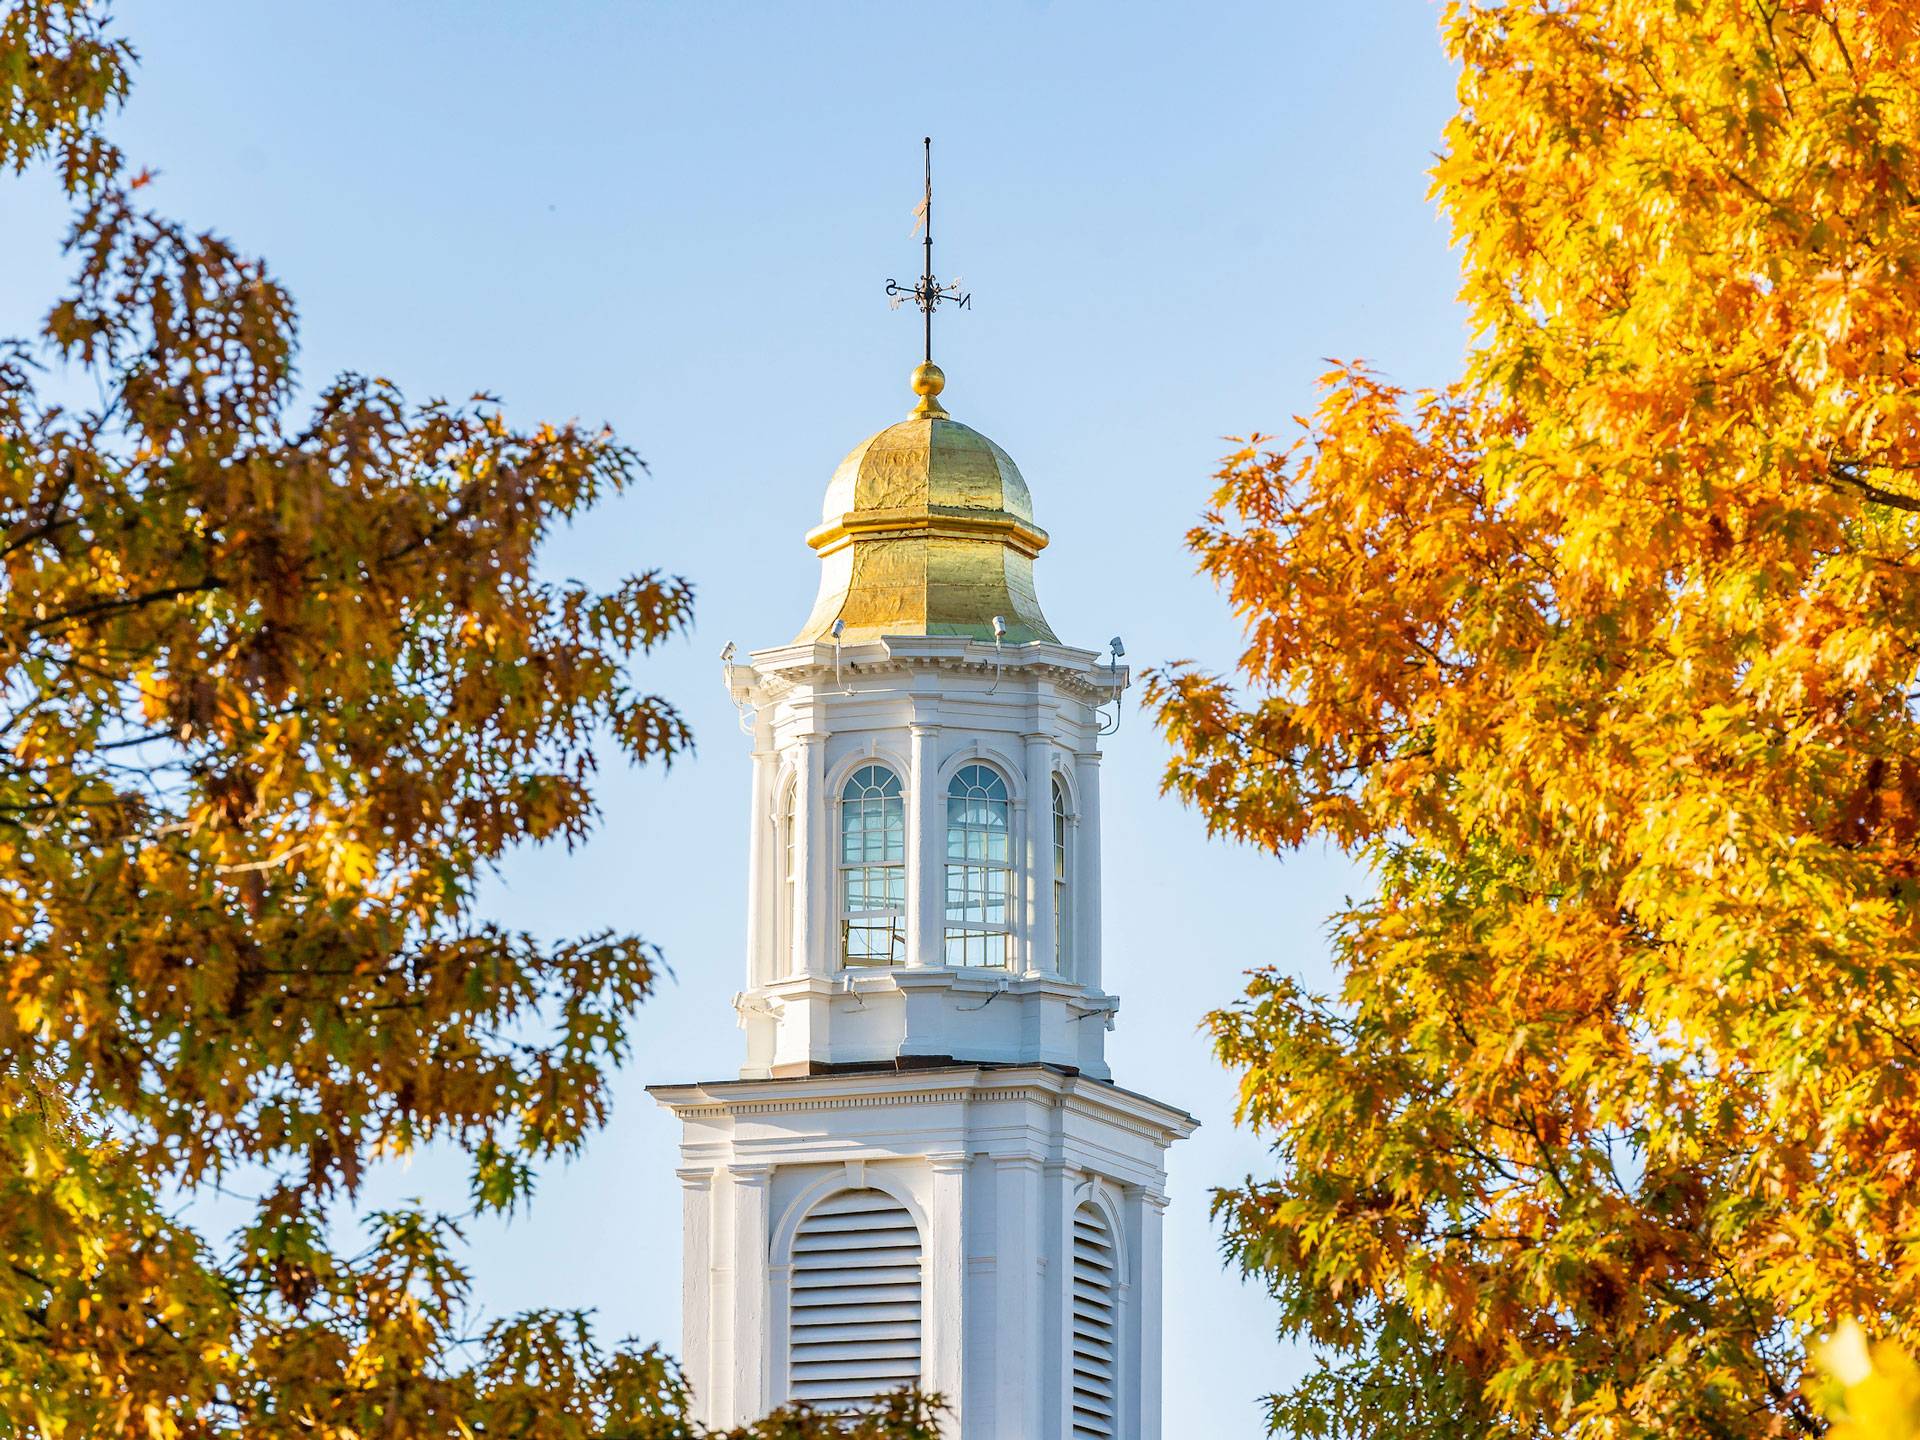 Tower of Colgate Memorial Chapel with bright autumn foliage on either side